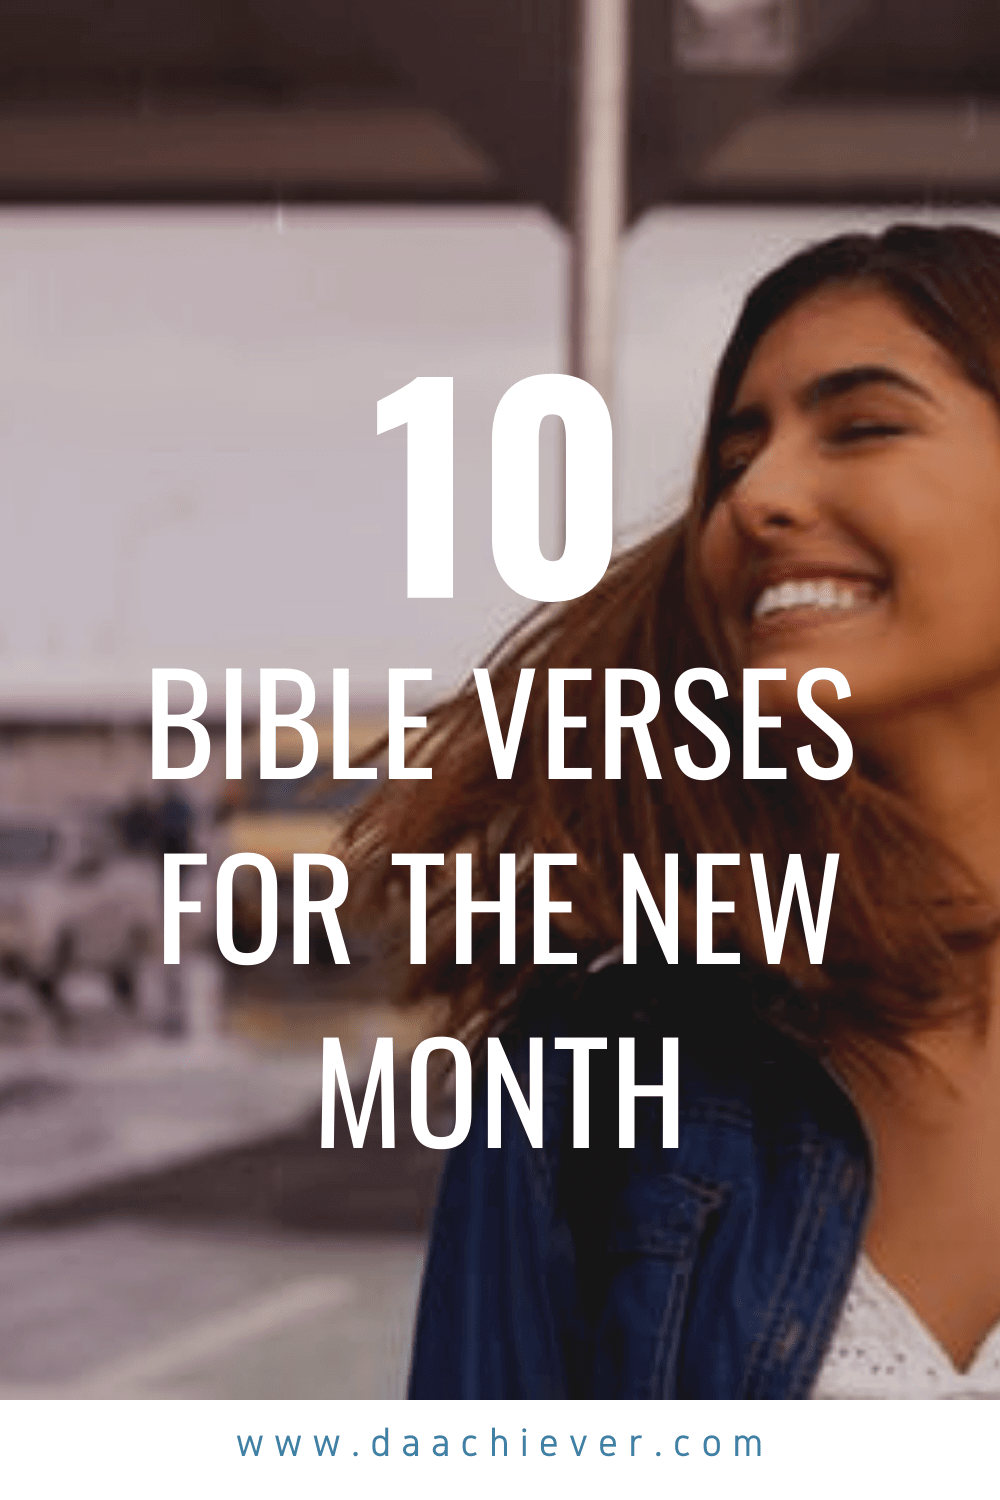 10 Bible Verses for the new month